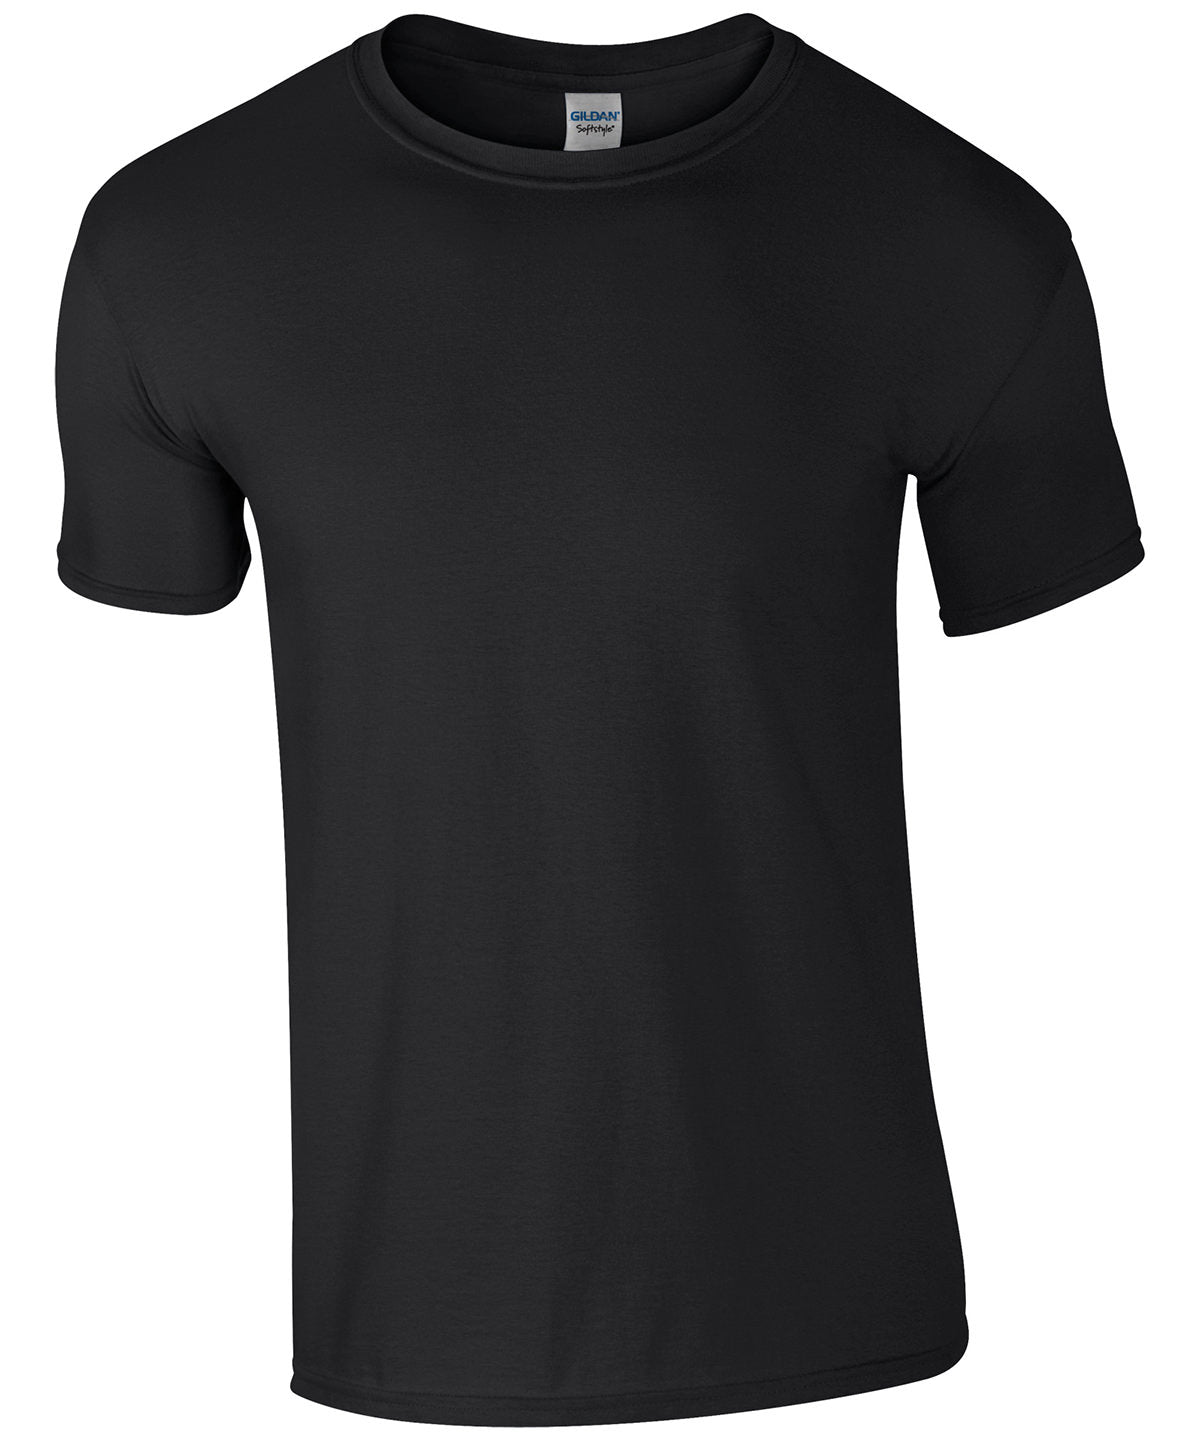 Black Teeshirt with Photo on Front and Print on Back